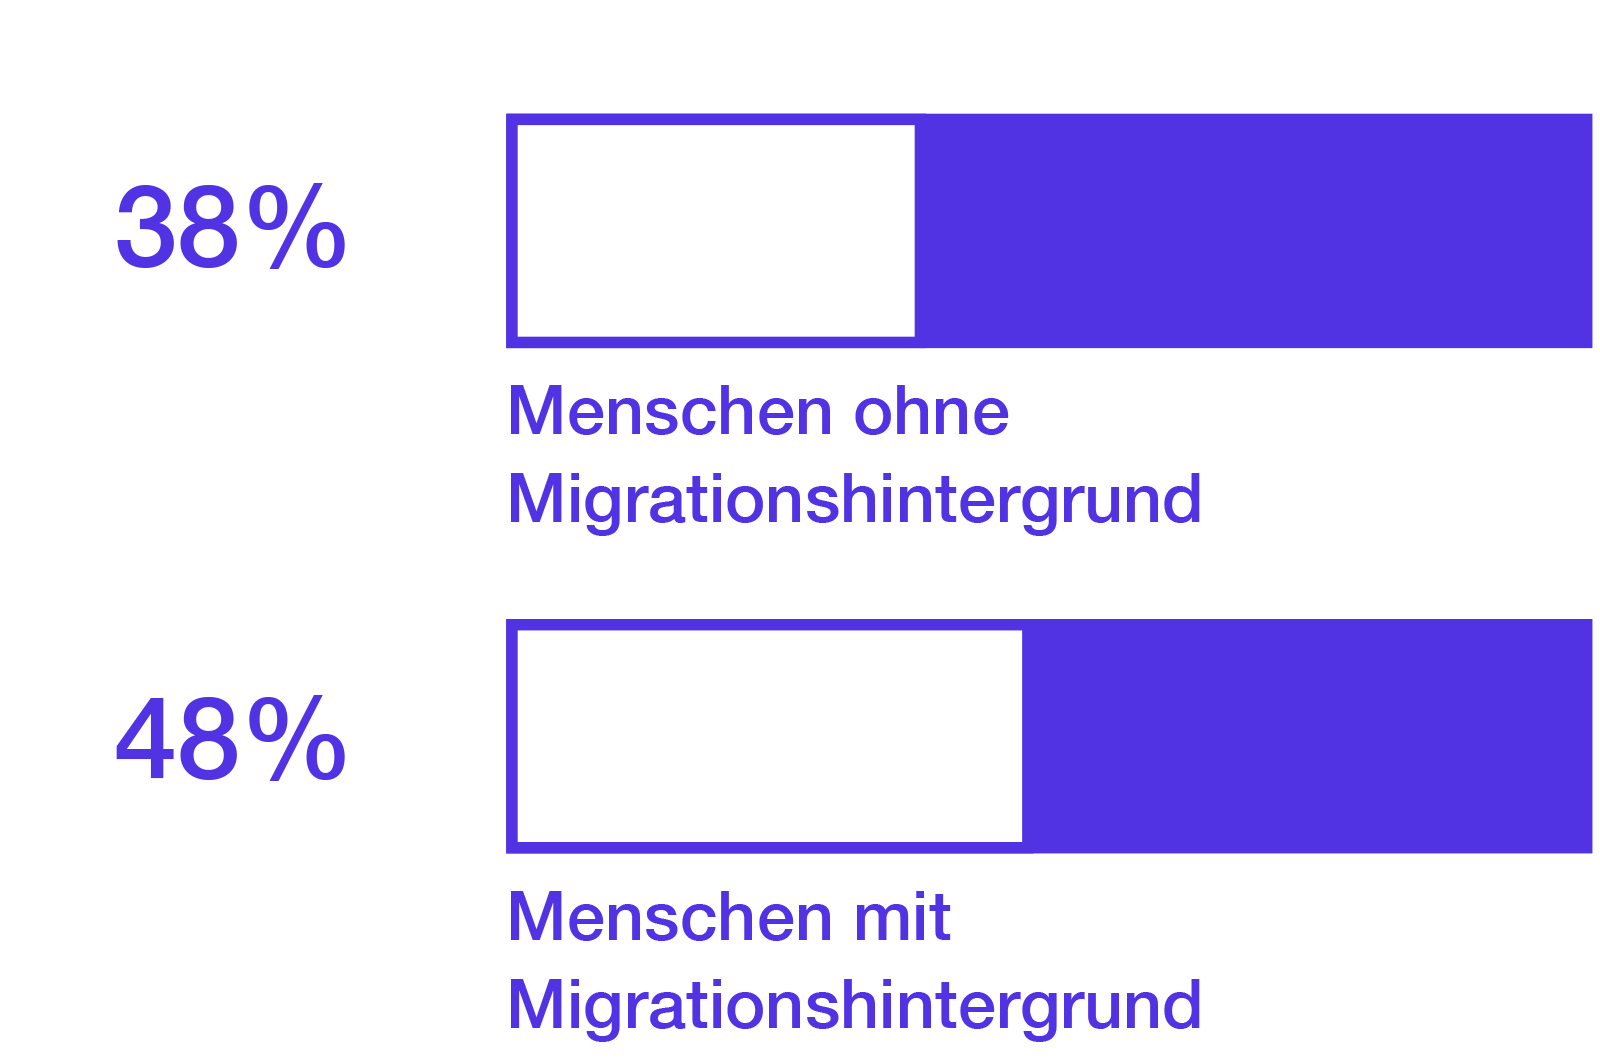 38 % without a migrant background. 48 % with a migrant background.